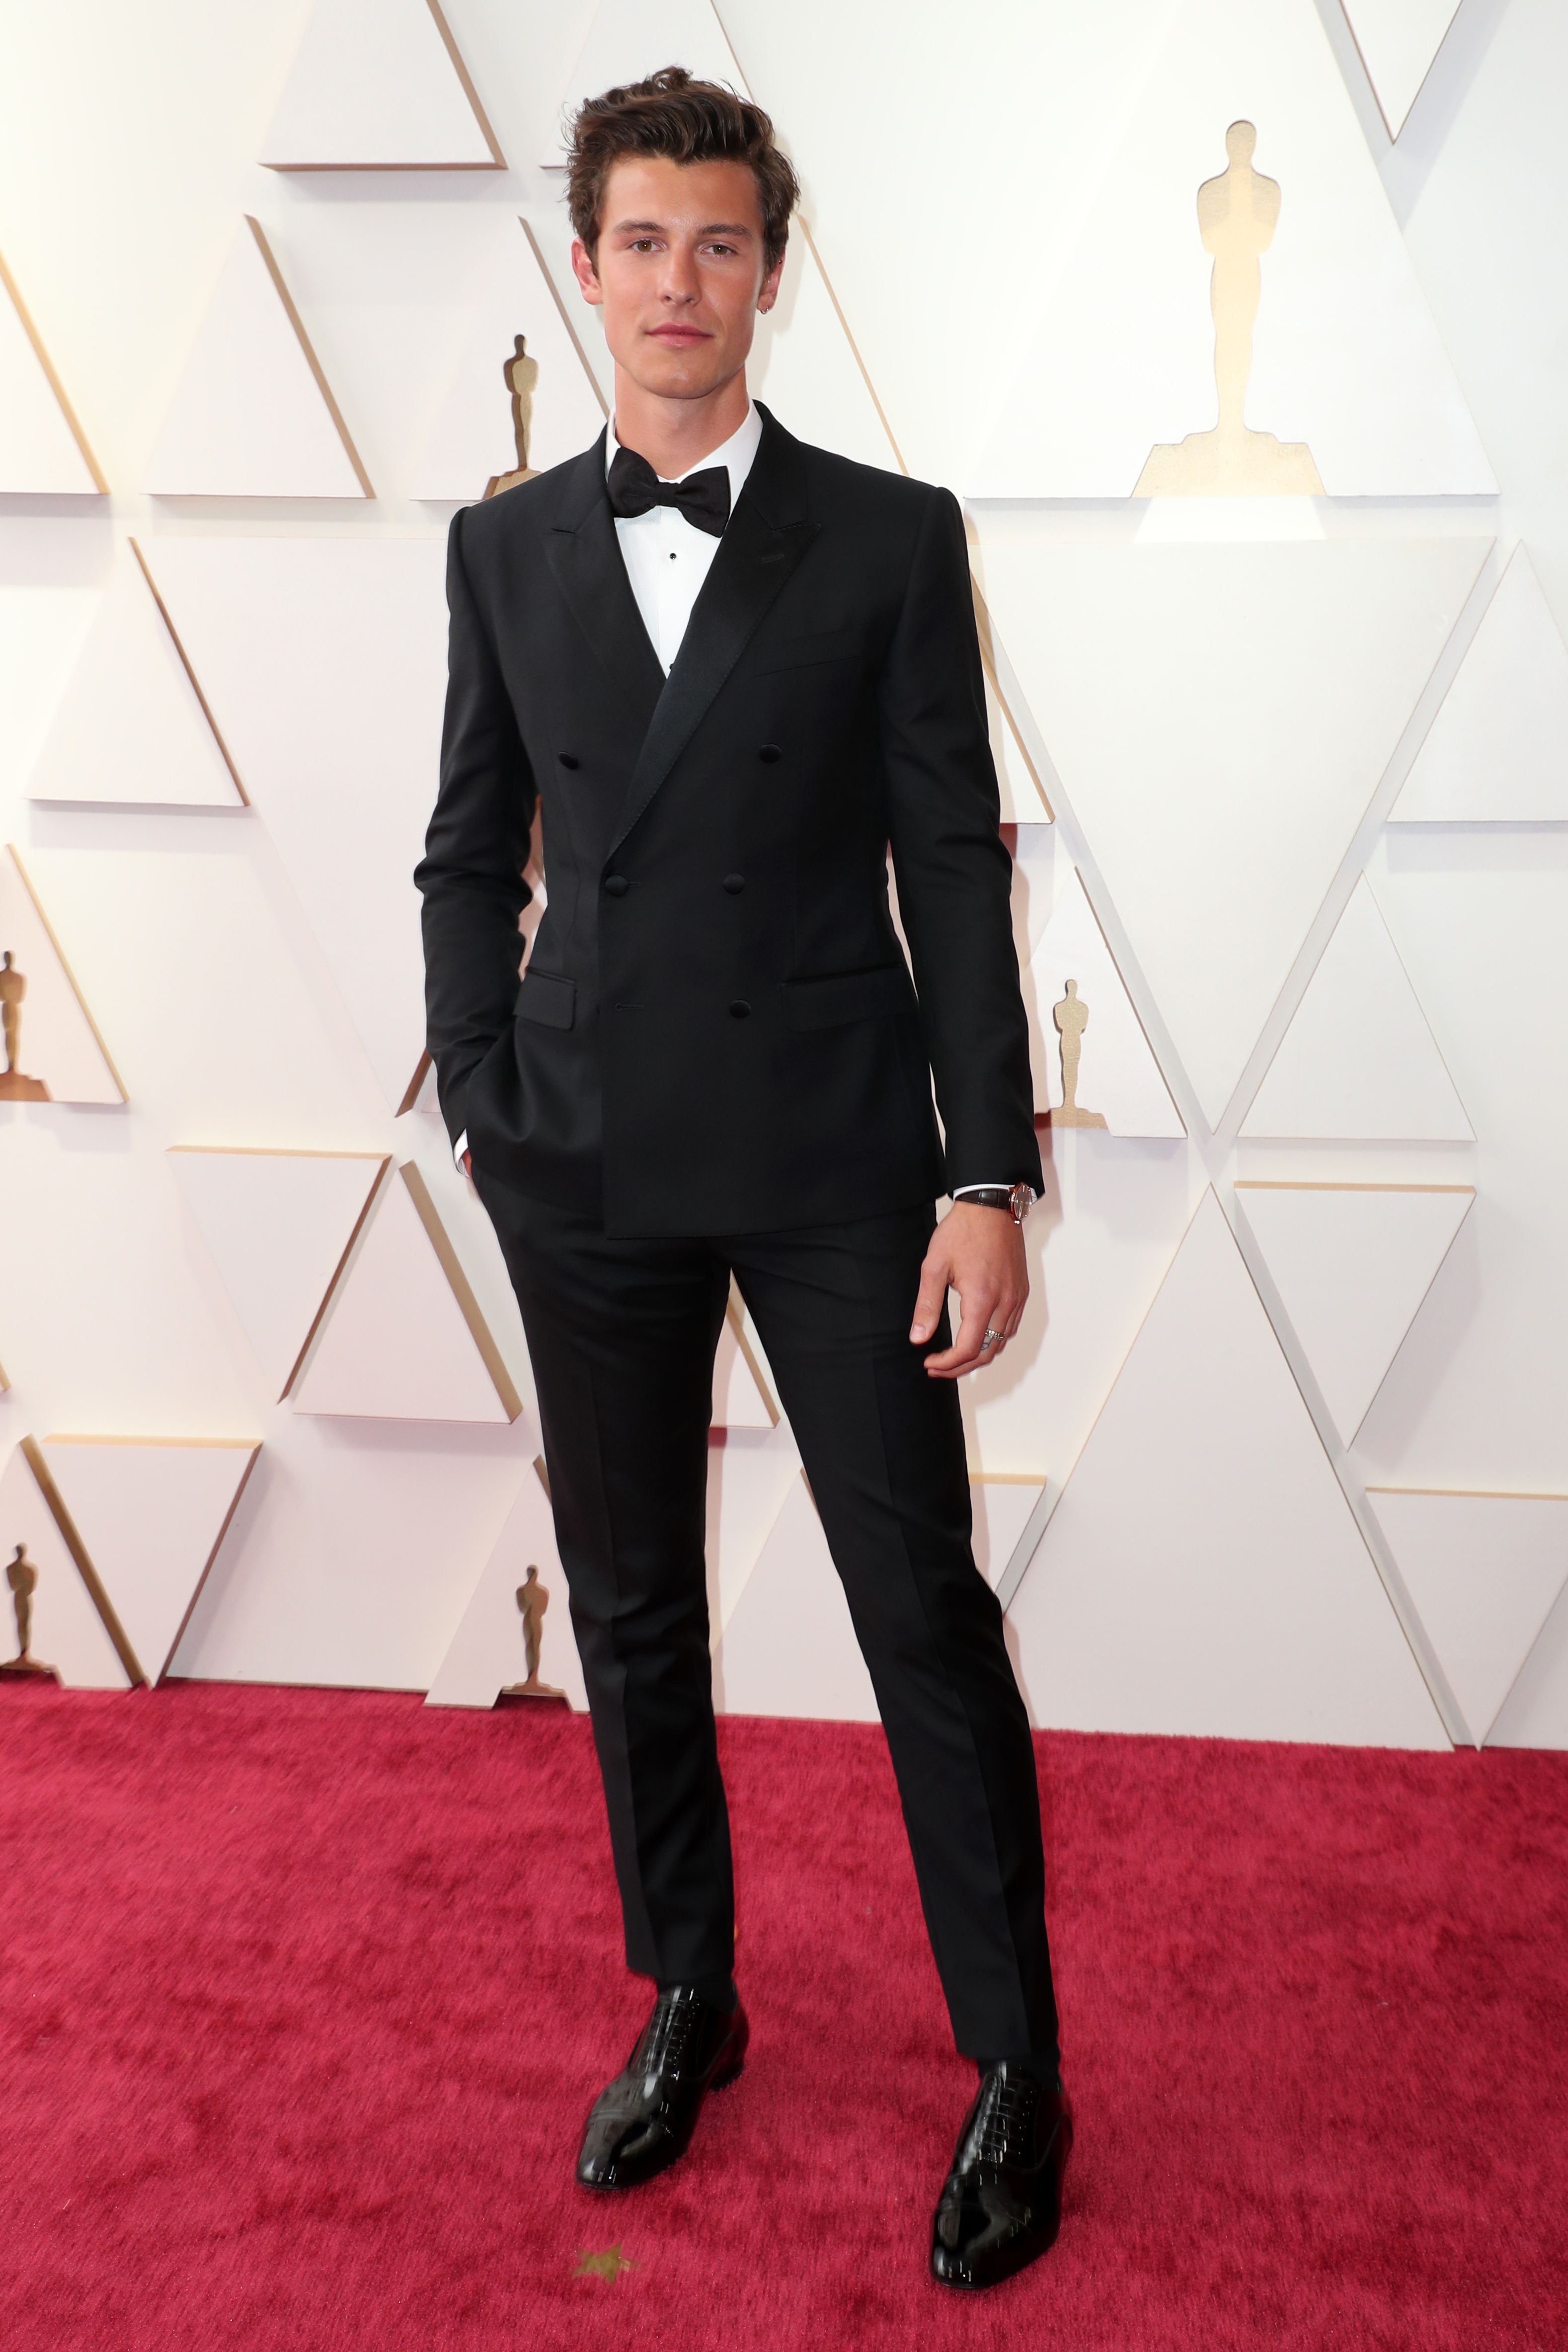 Shawn Mendes' Outfit at the 2022 Oscars Red Carpet Photos